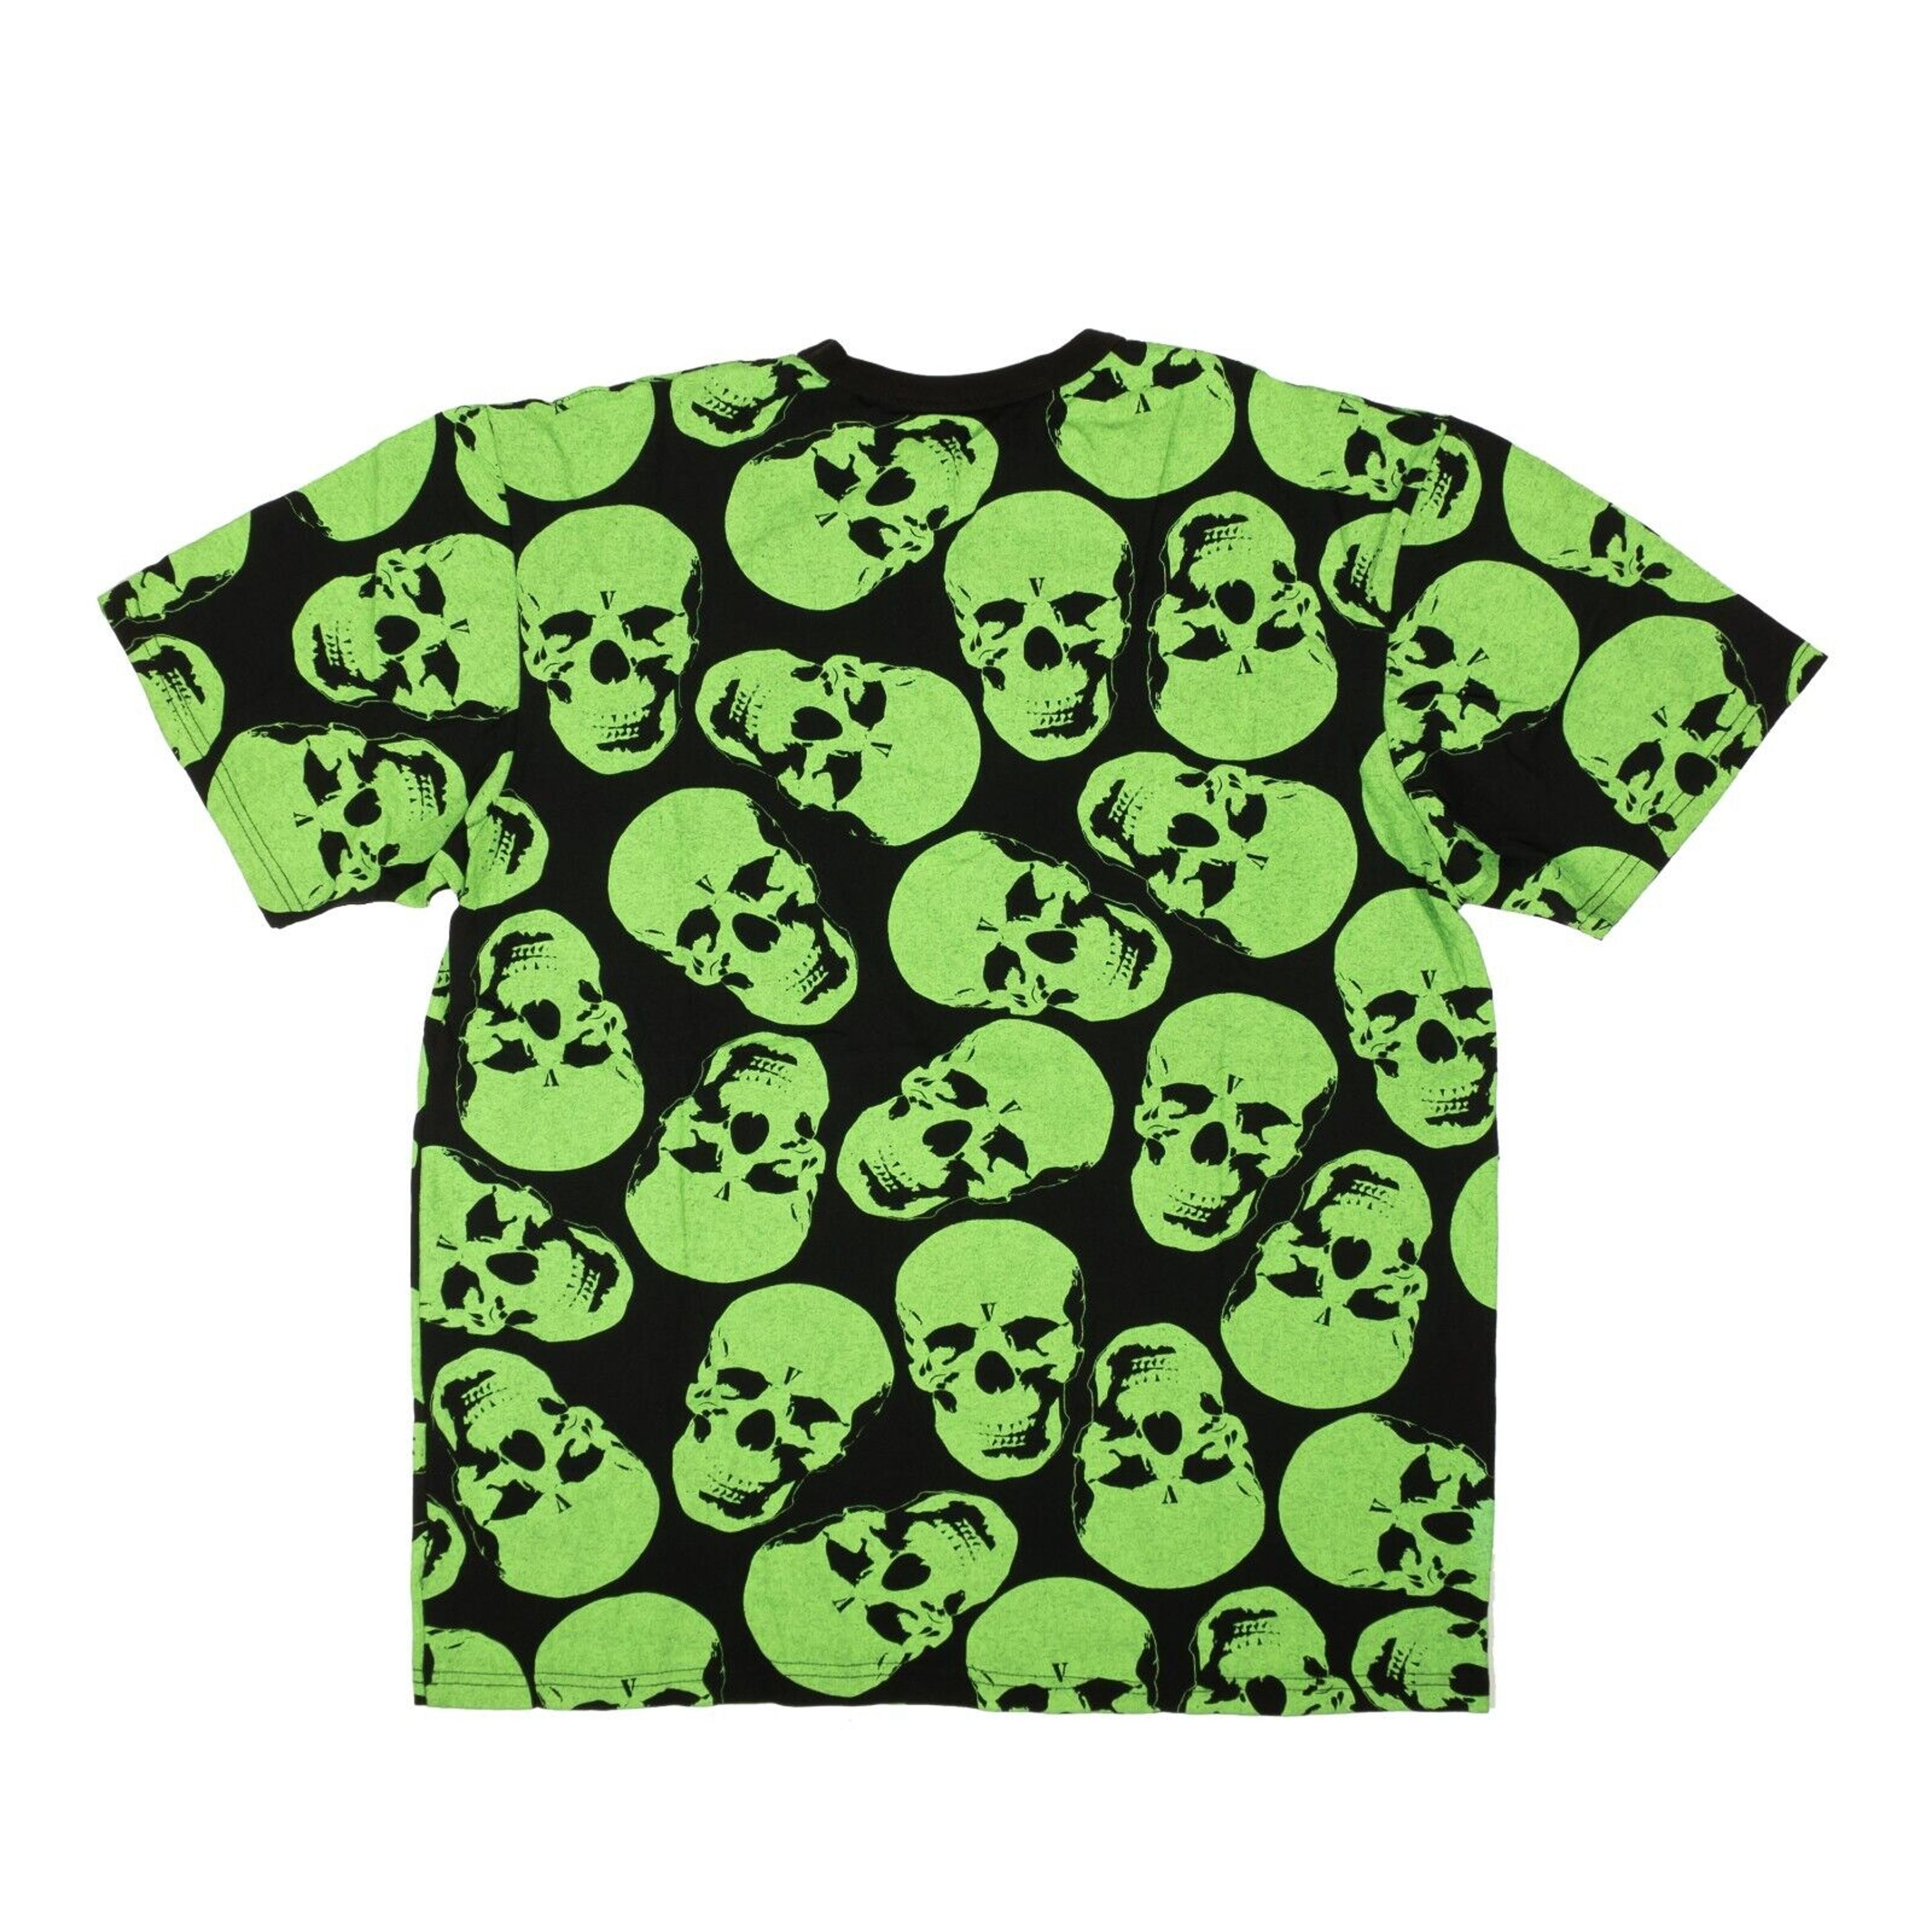 Alternate View 2 of Black And Green Crypt Short Sleeve T-Shirt